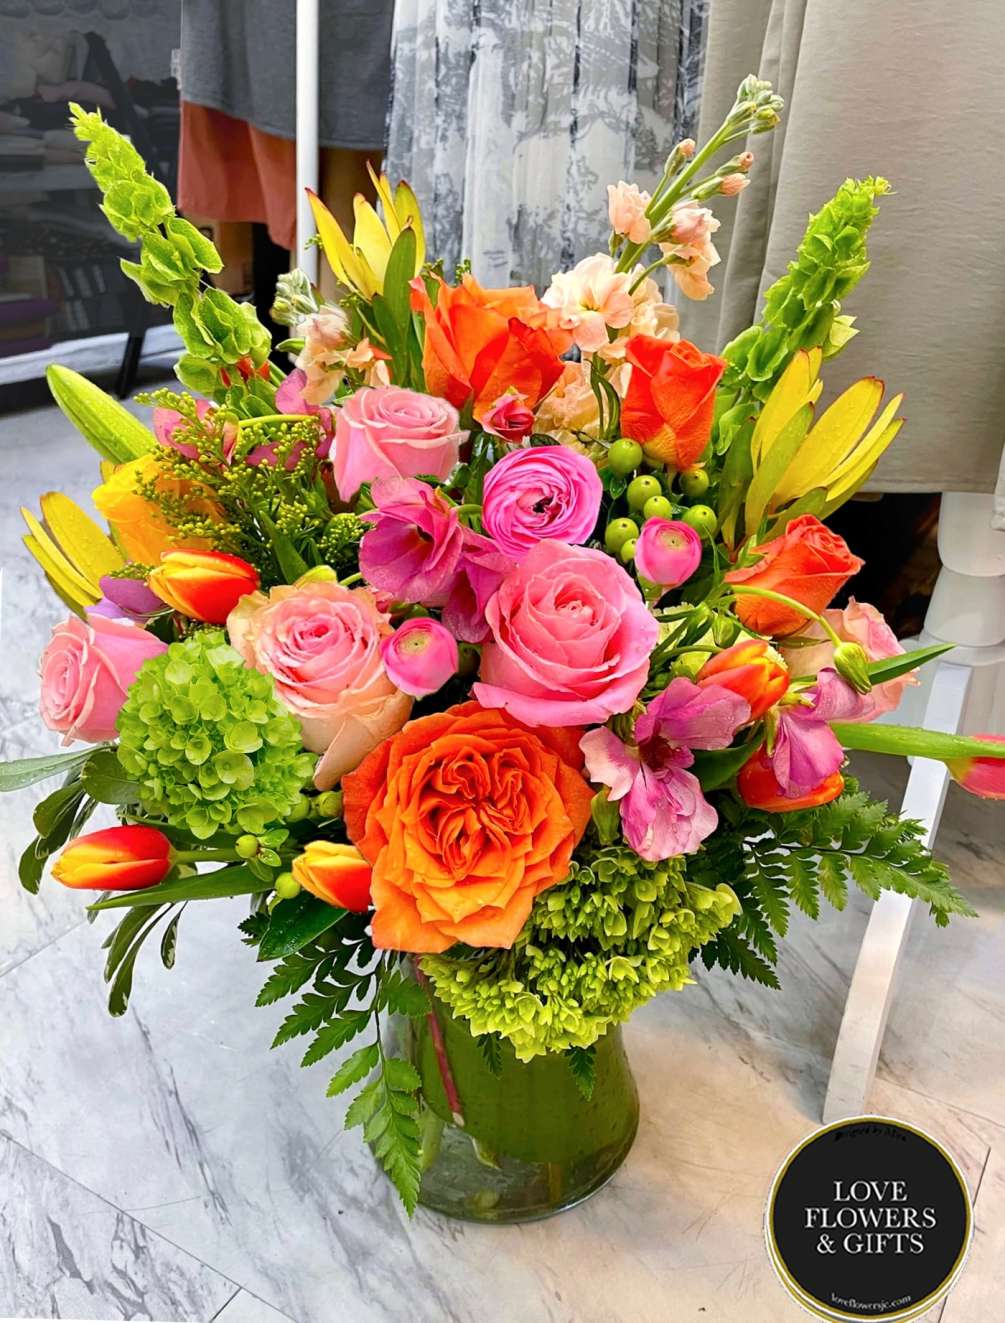 A luxurious and abundant spring arrangement made of ranunculus, roses, tulips, snapdragons